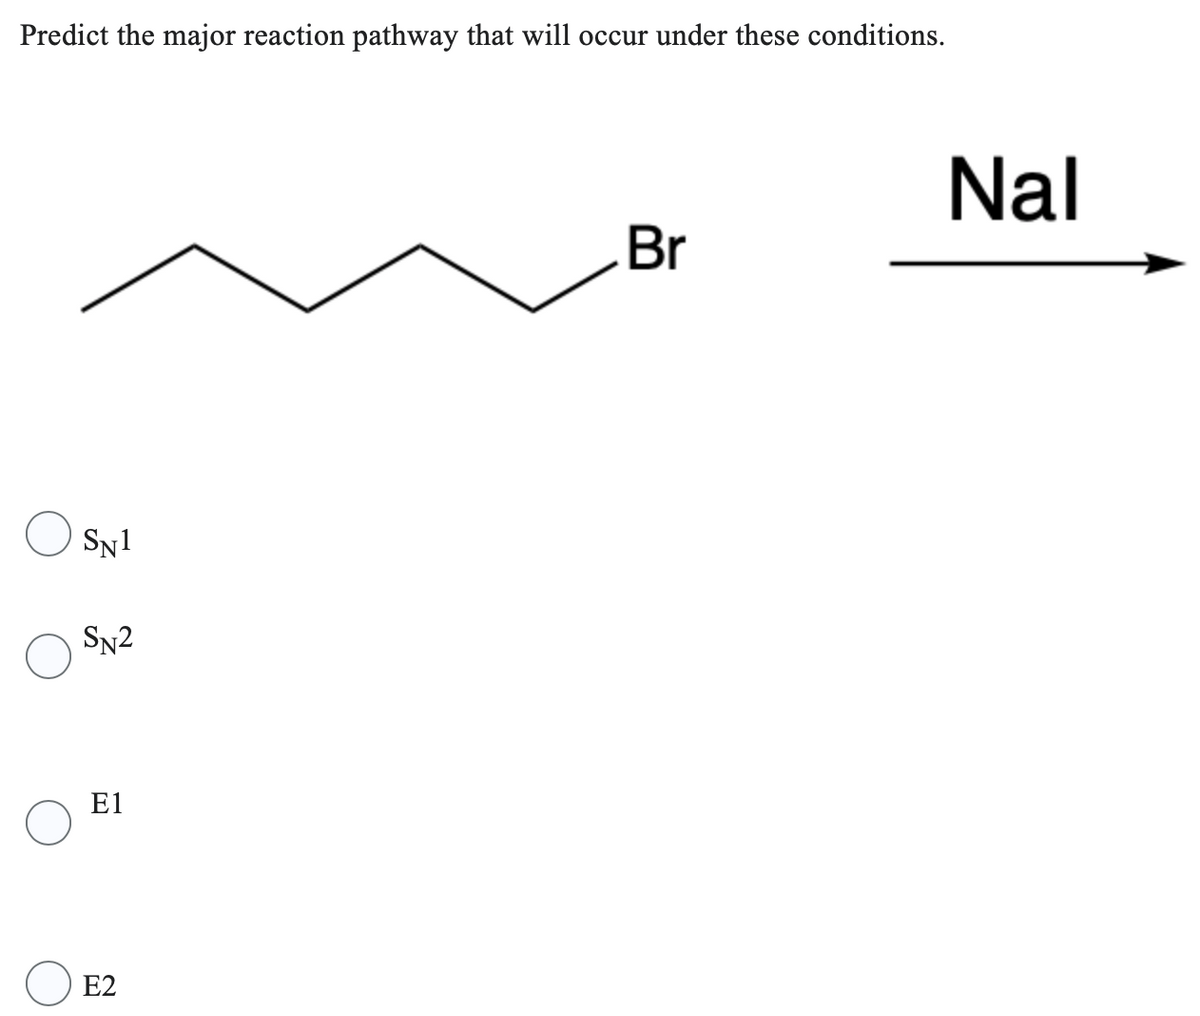 Predict the major reaction pathway that will occur under these conditions.
SN1
SN2
E1
E2
Br
Nal